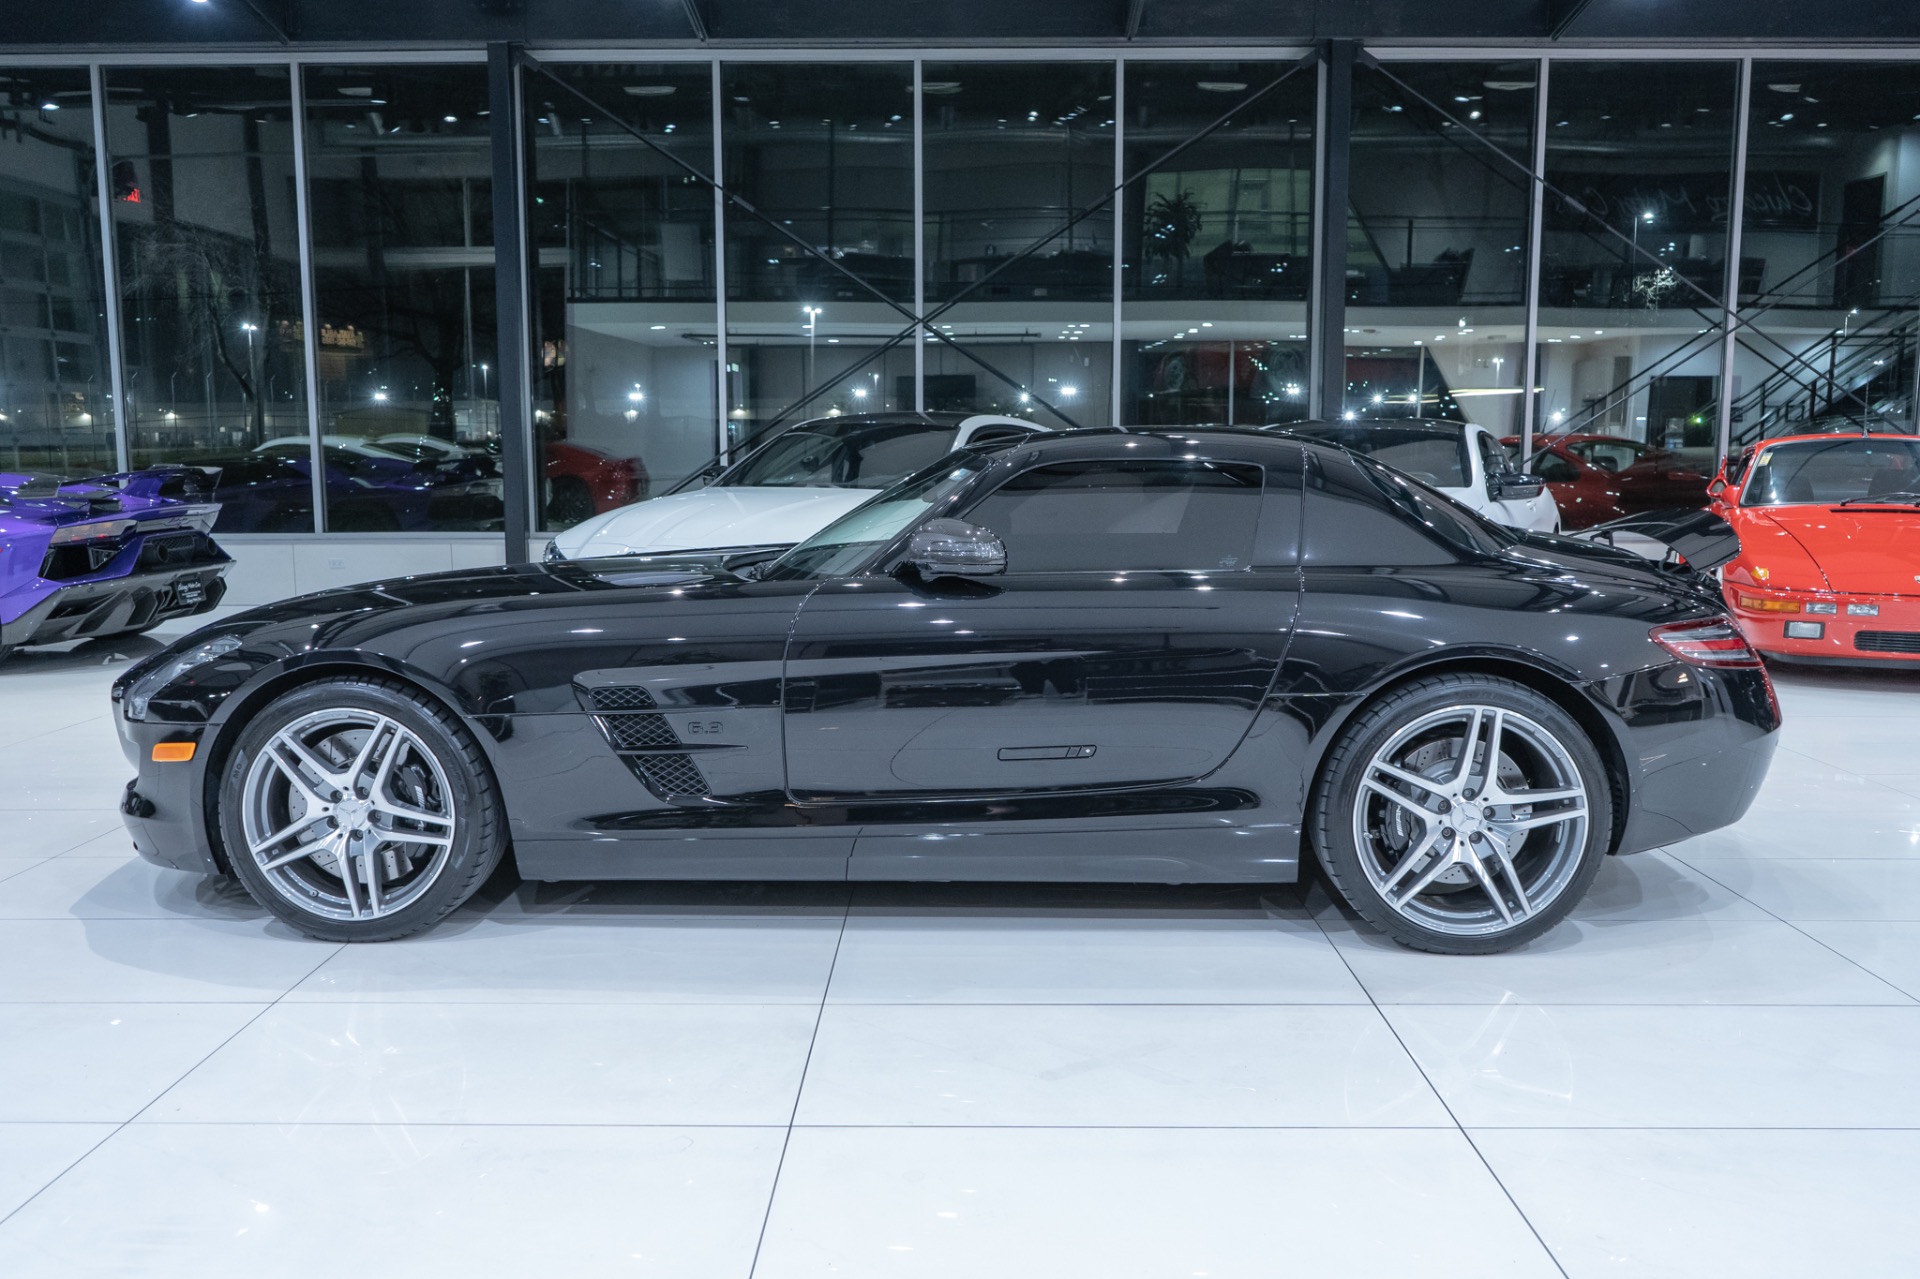 Used-2012-Mercedes-Benz-SLS-AMG-Coupe-Low-miles-RENNtech-Exhaust-Gullwing-Doors-Recent-Service